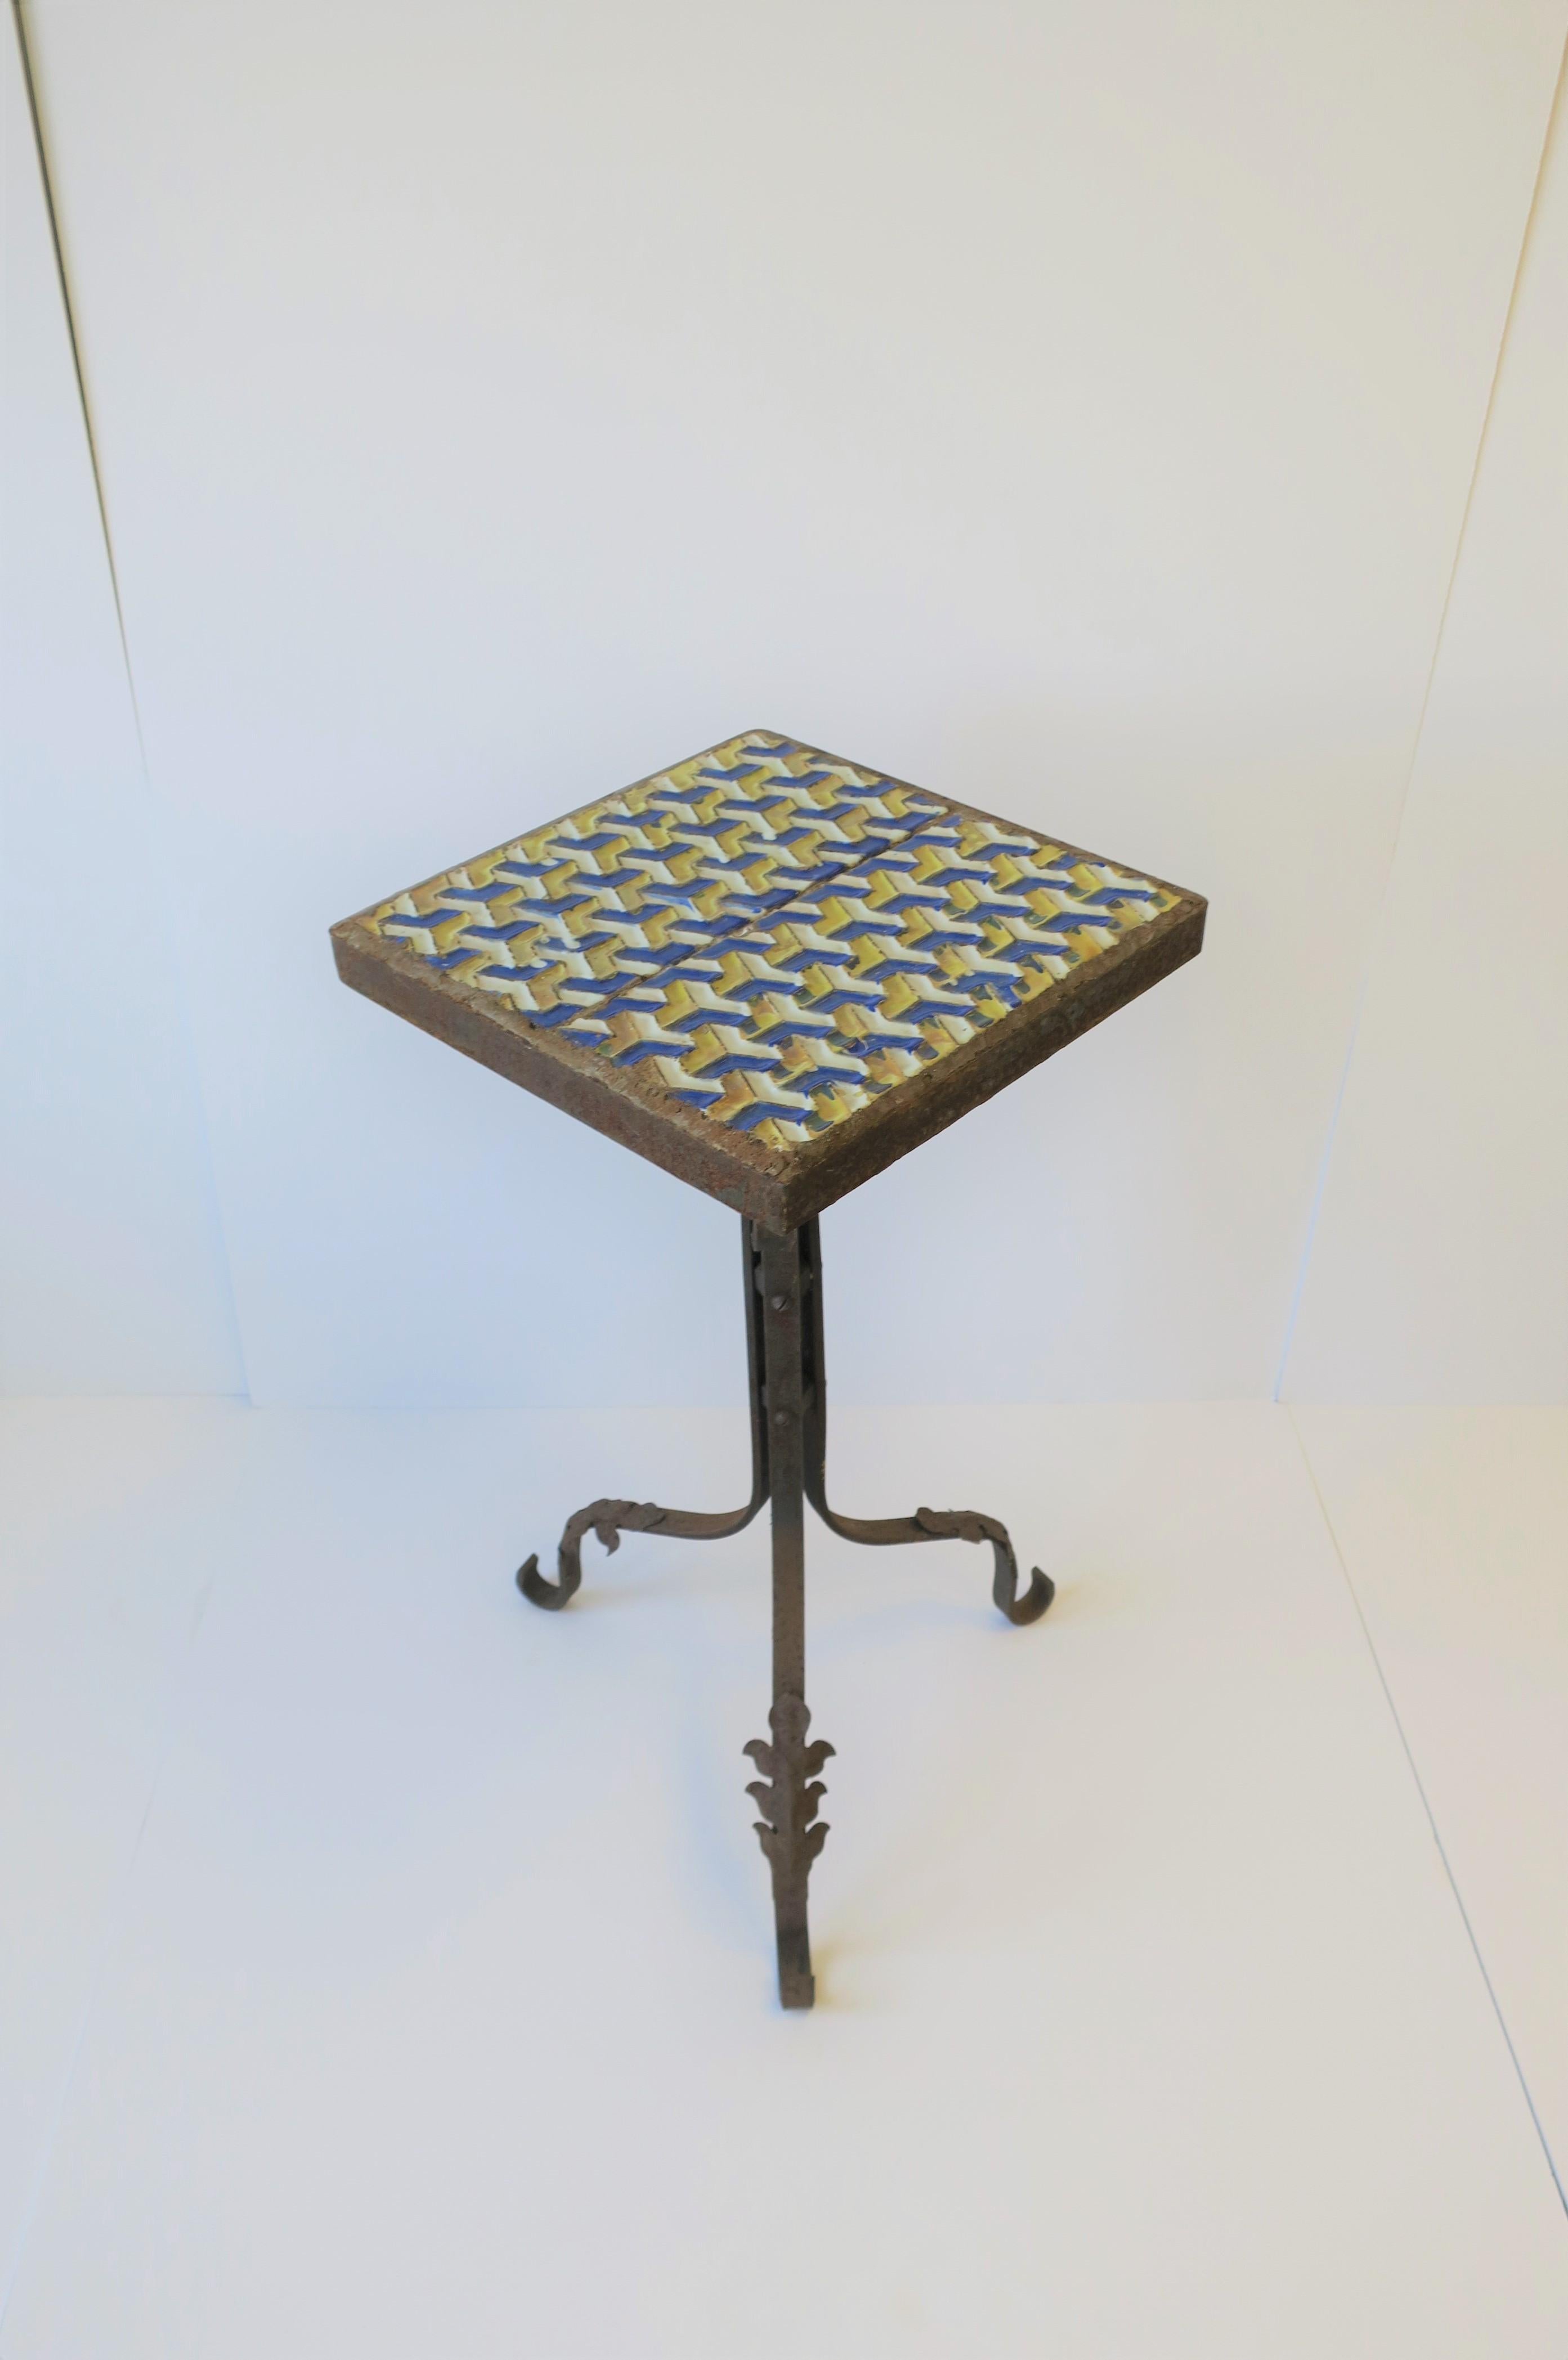 Midcentury Outdoor Patio Side Table with Geometric Ceramic Top 1